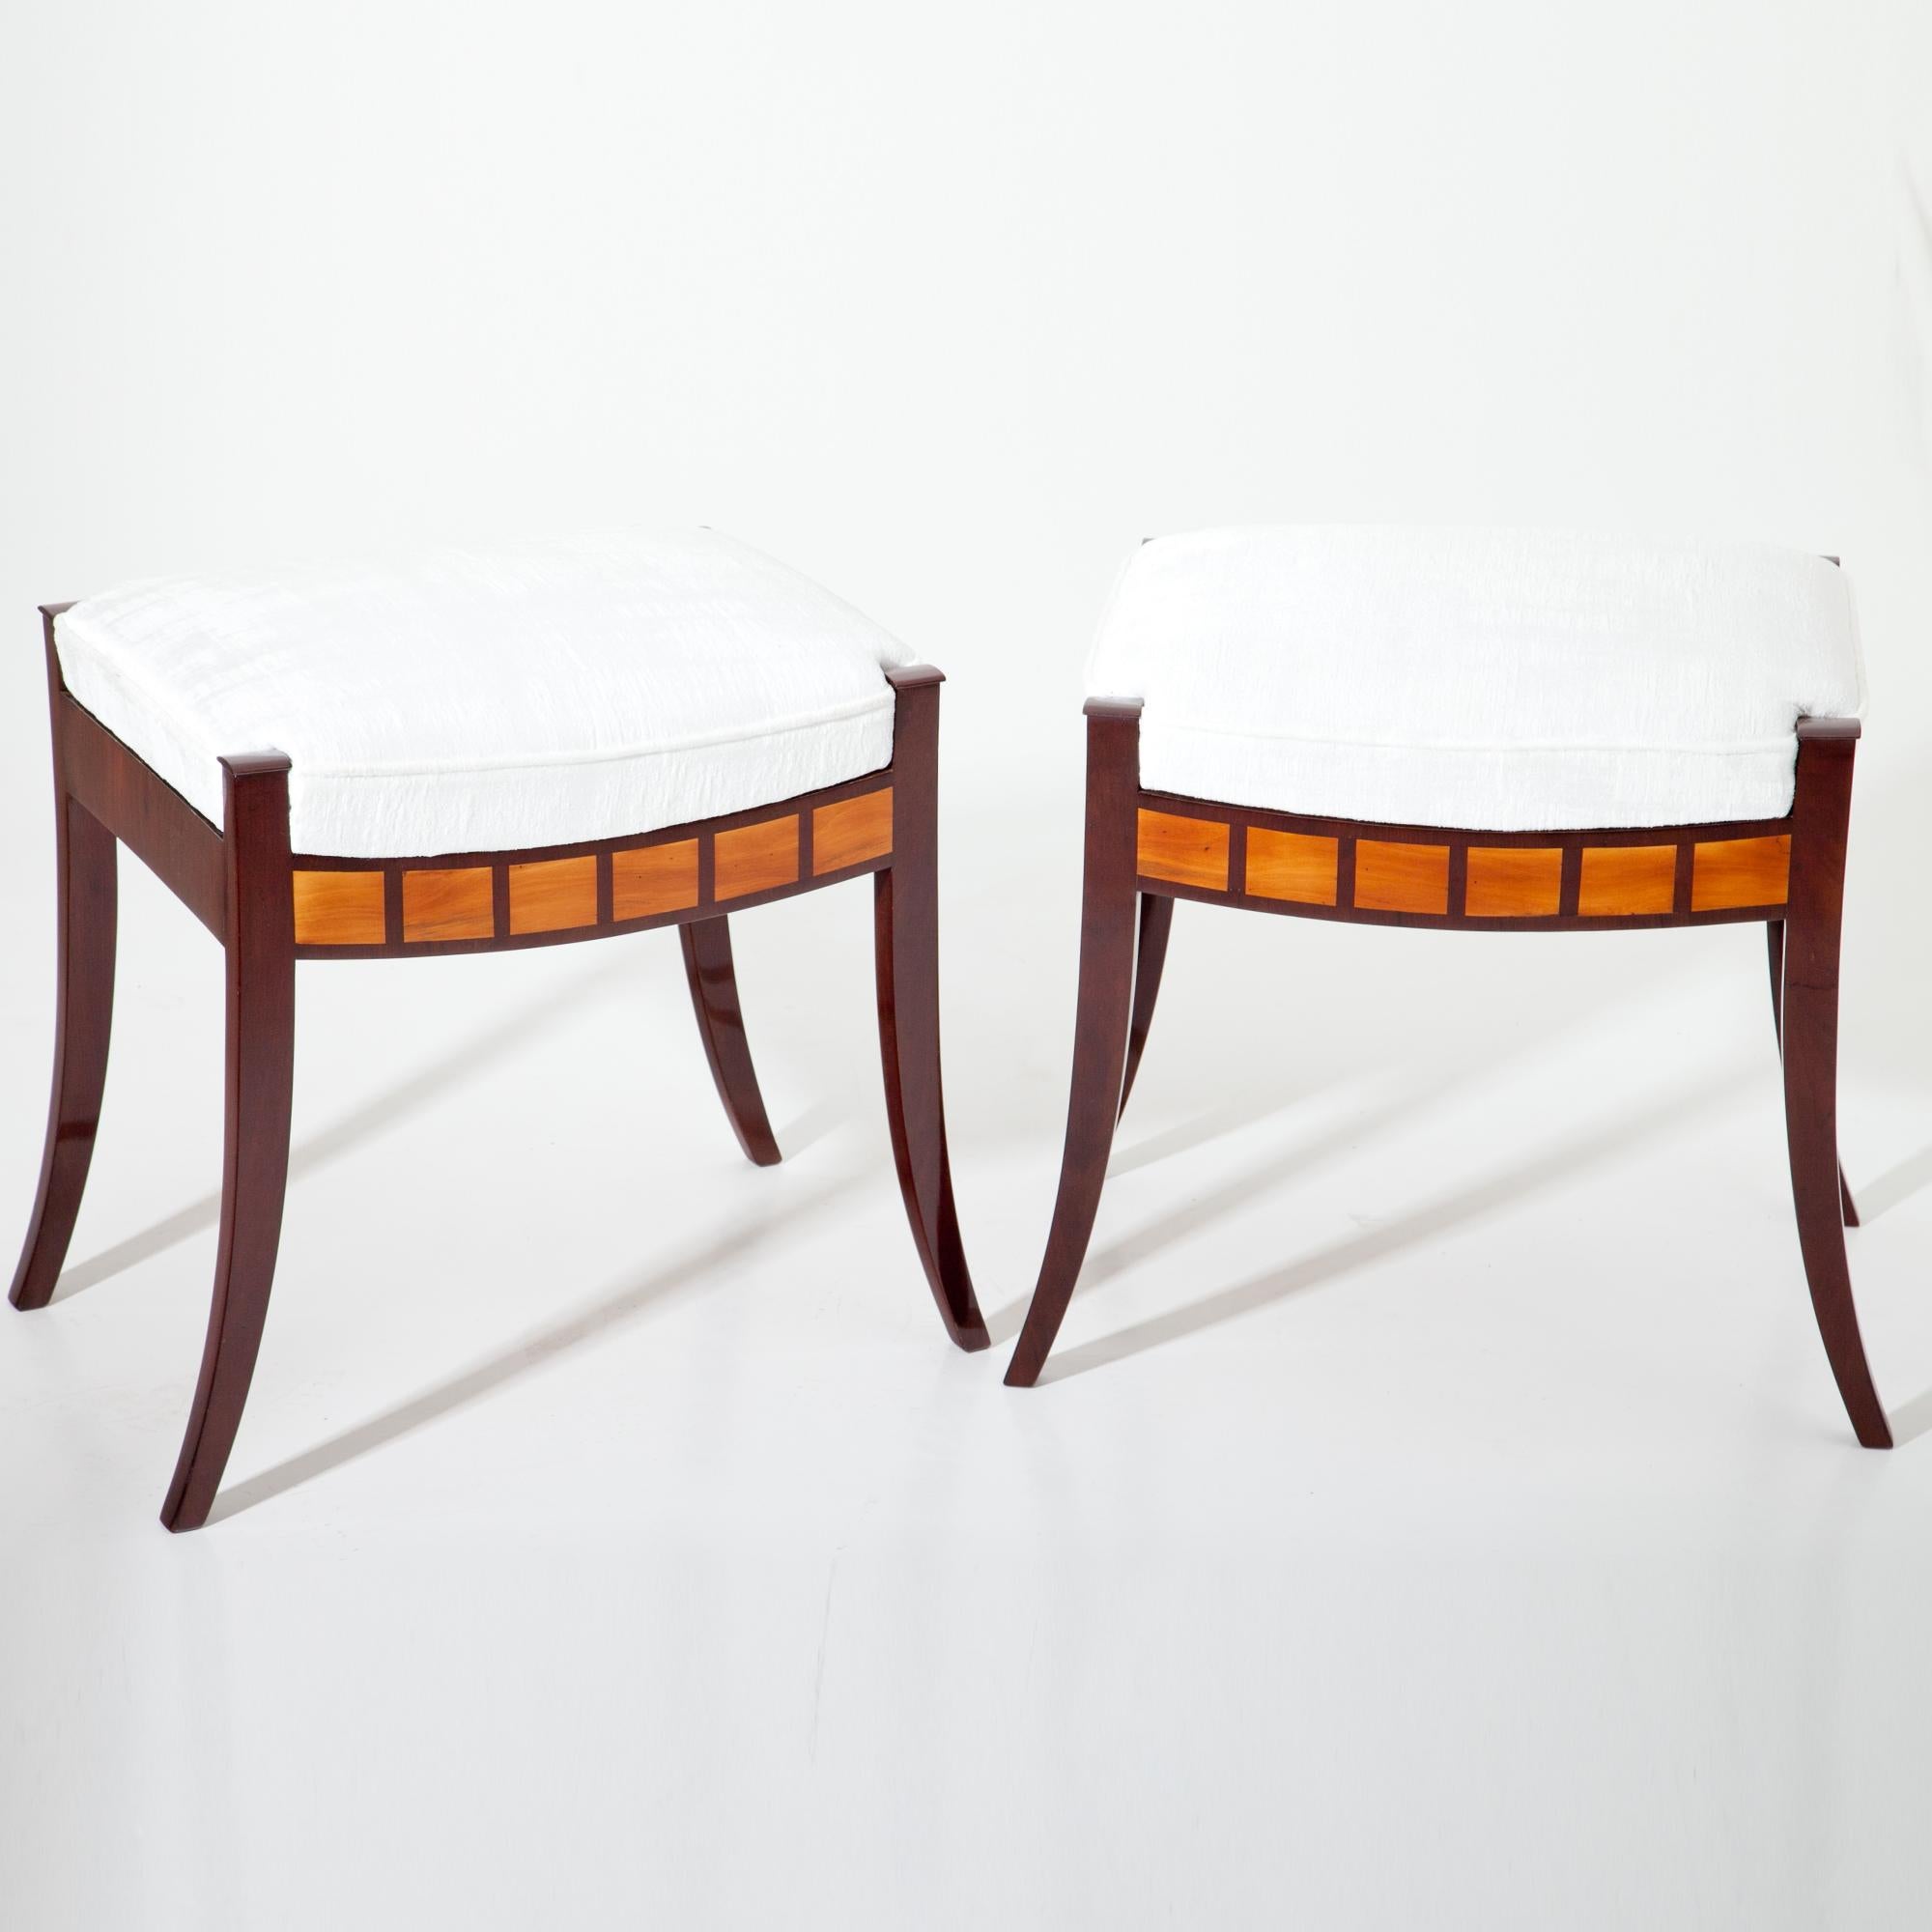 Pair of Biedermeier Tabourets, standing on tapered bent legs out of Mahogany with a rectangular seat. The front rails are decorated with rectangular fruitwood inlays. The seats were reupholstered with a white fabric.